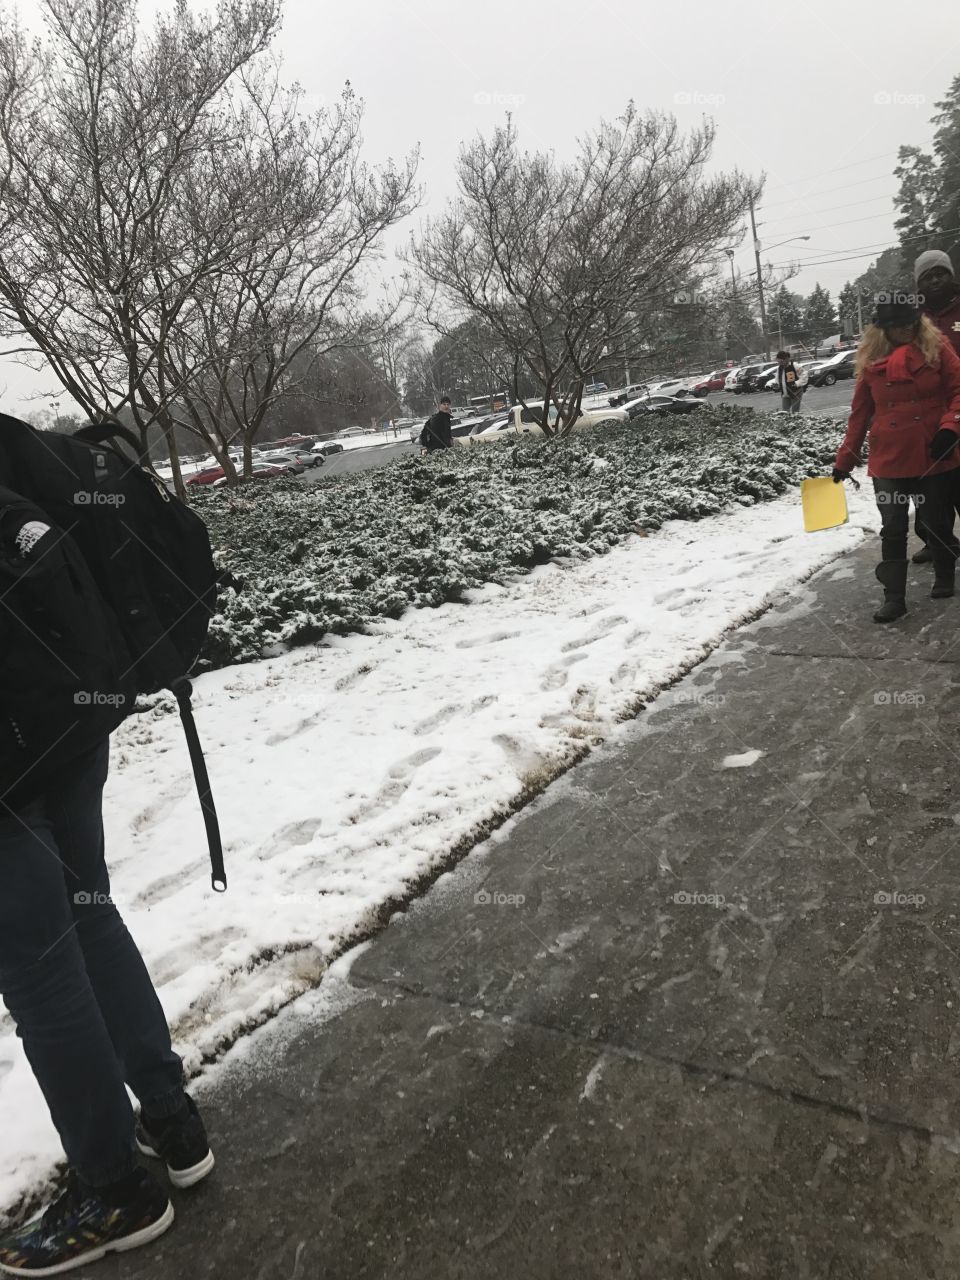 Students walking on a sideway after a snowfall, with snow covered bushes in the background